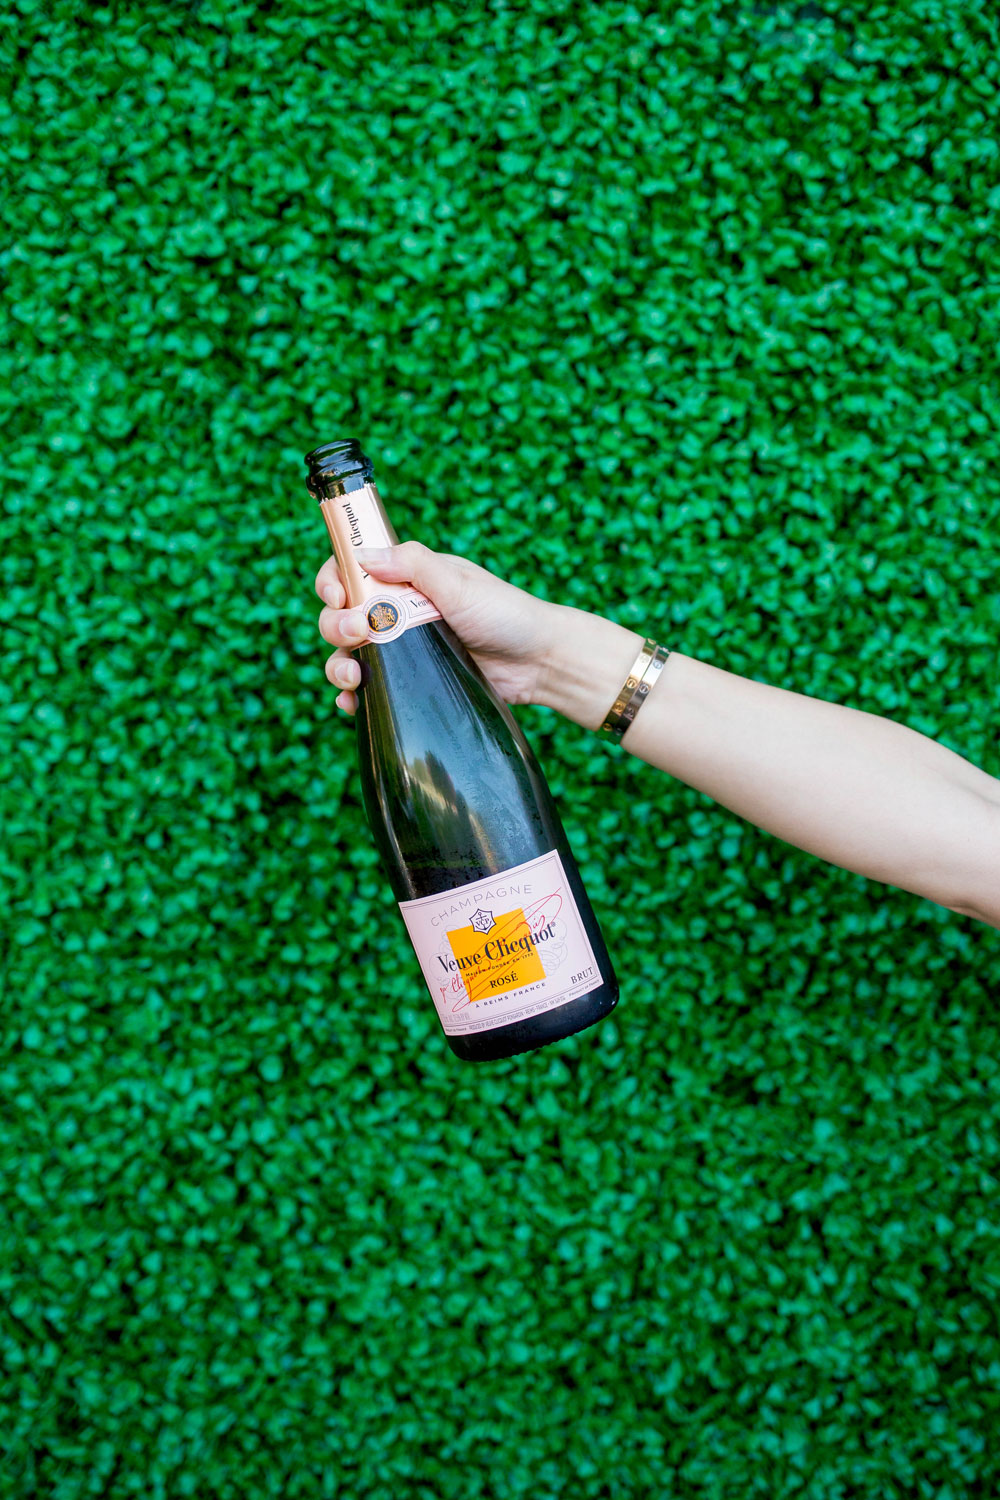 Fifth-Annual Veuve Clicquot Polo Classic, Los Angeles Featuring